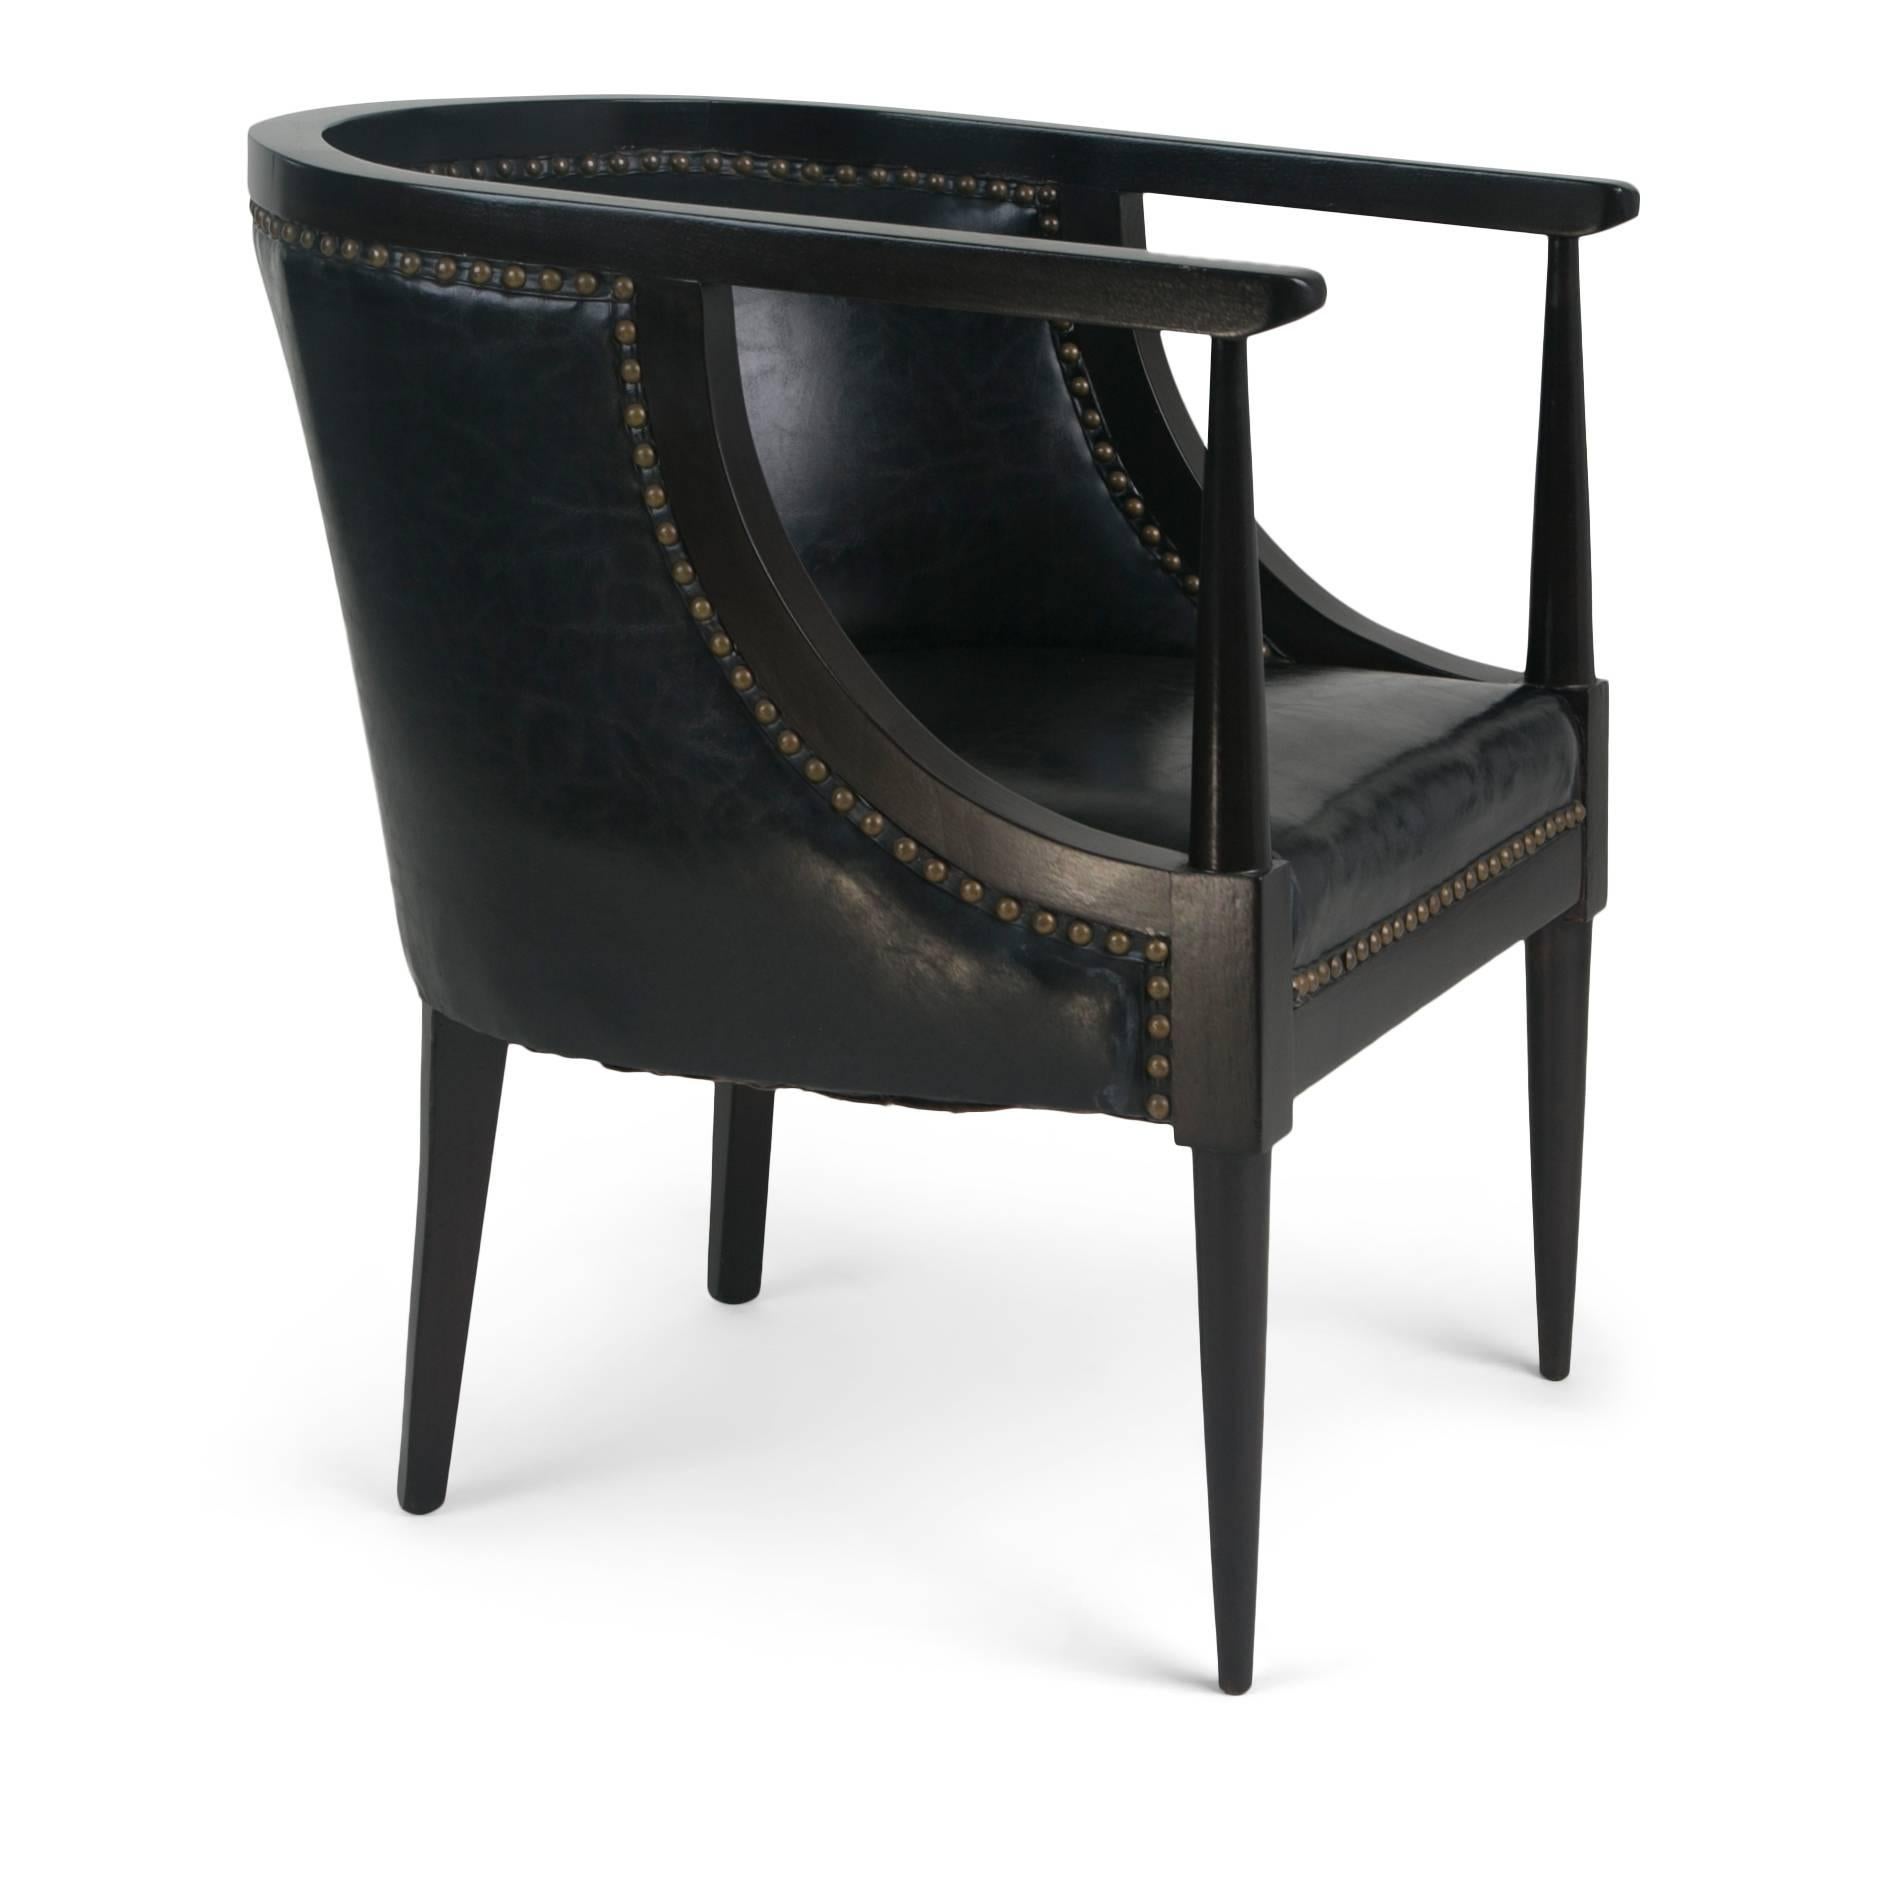 Pair of handsome Art Deco style tub chairs featuring a curved back and elegant frame. These armchairs have been upholstered in a high-quality black leather which is punctuated with bronze nailheads. These sculptural club chairs feature the use of